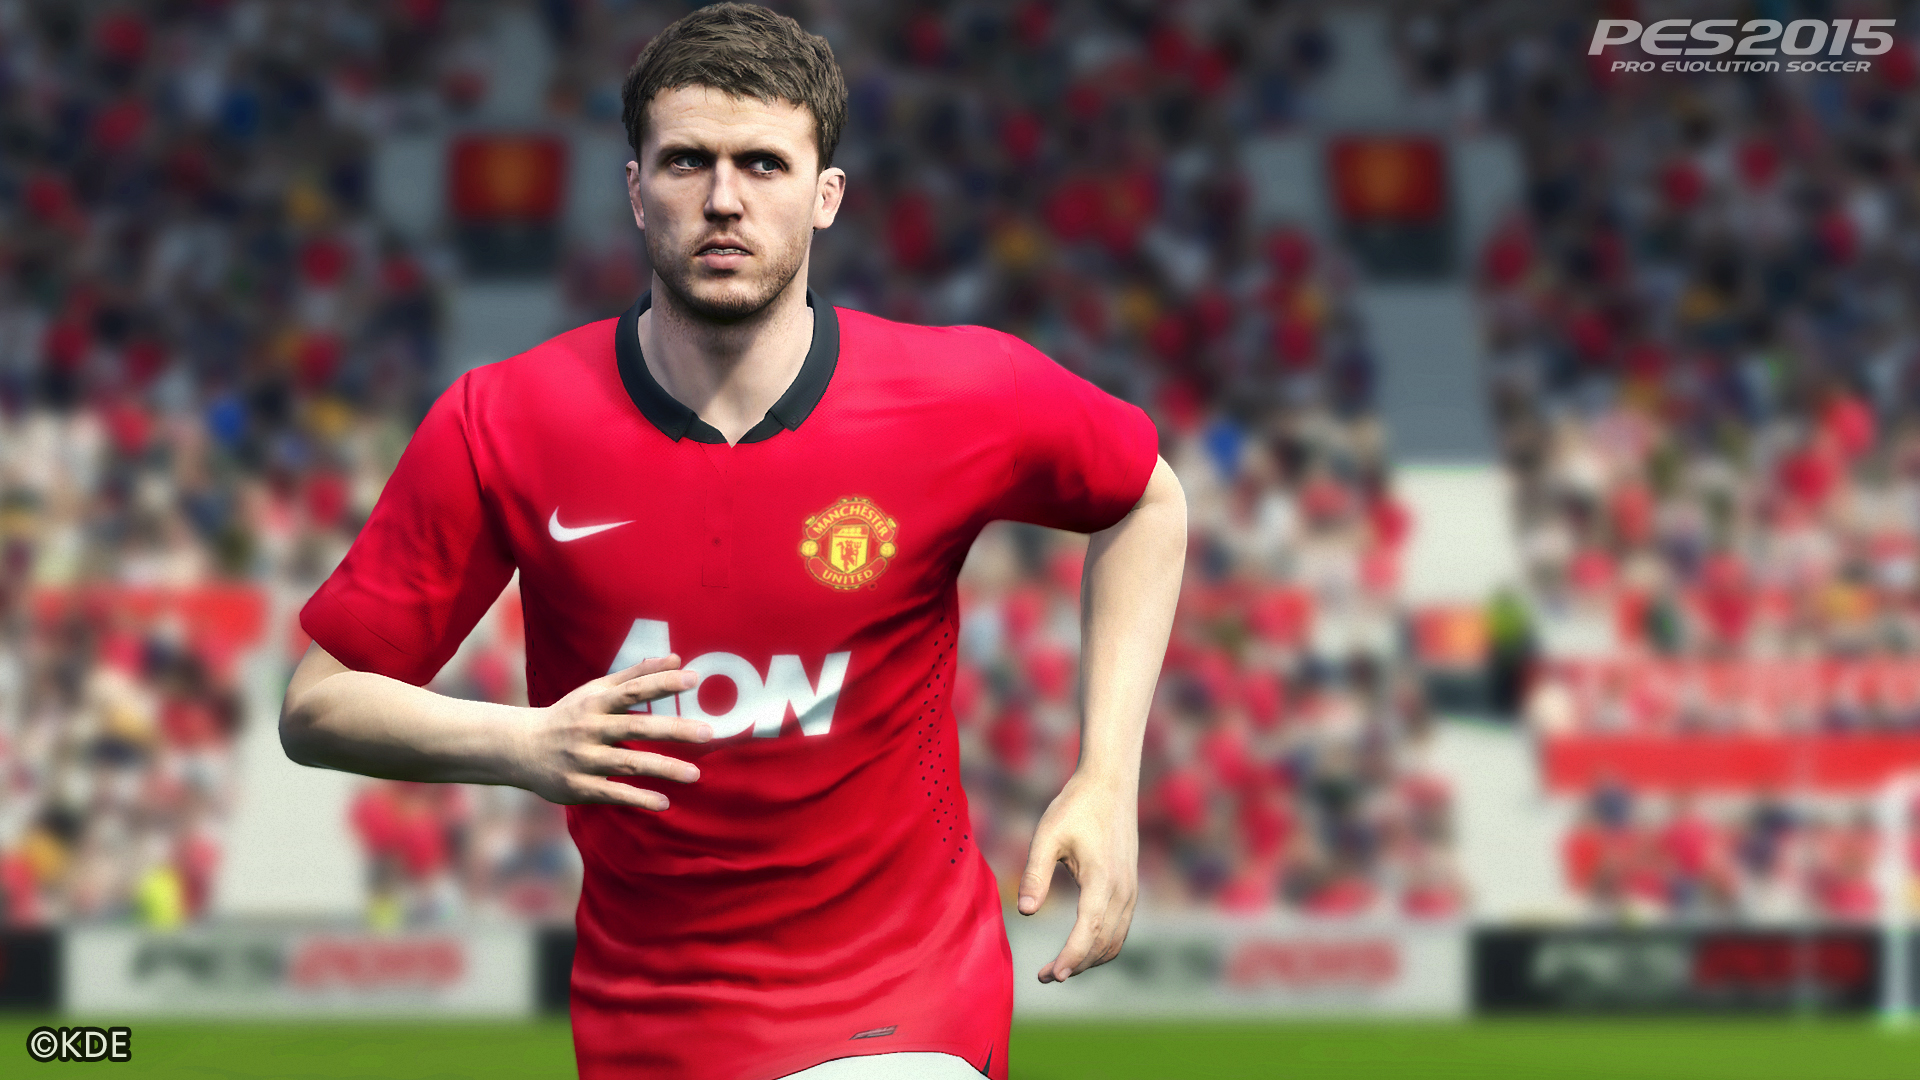 PES 2015 First Screens #4